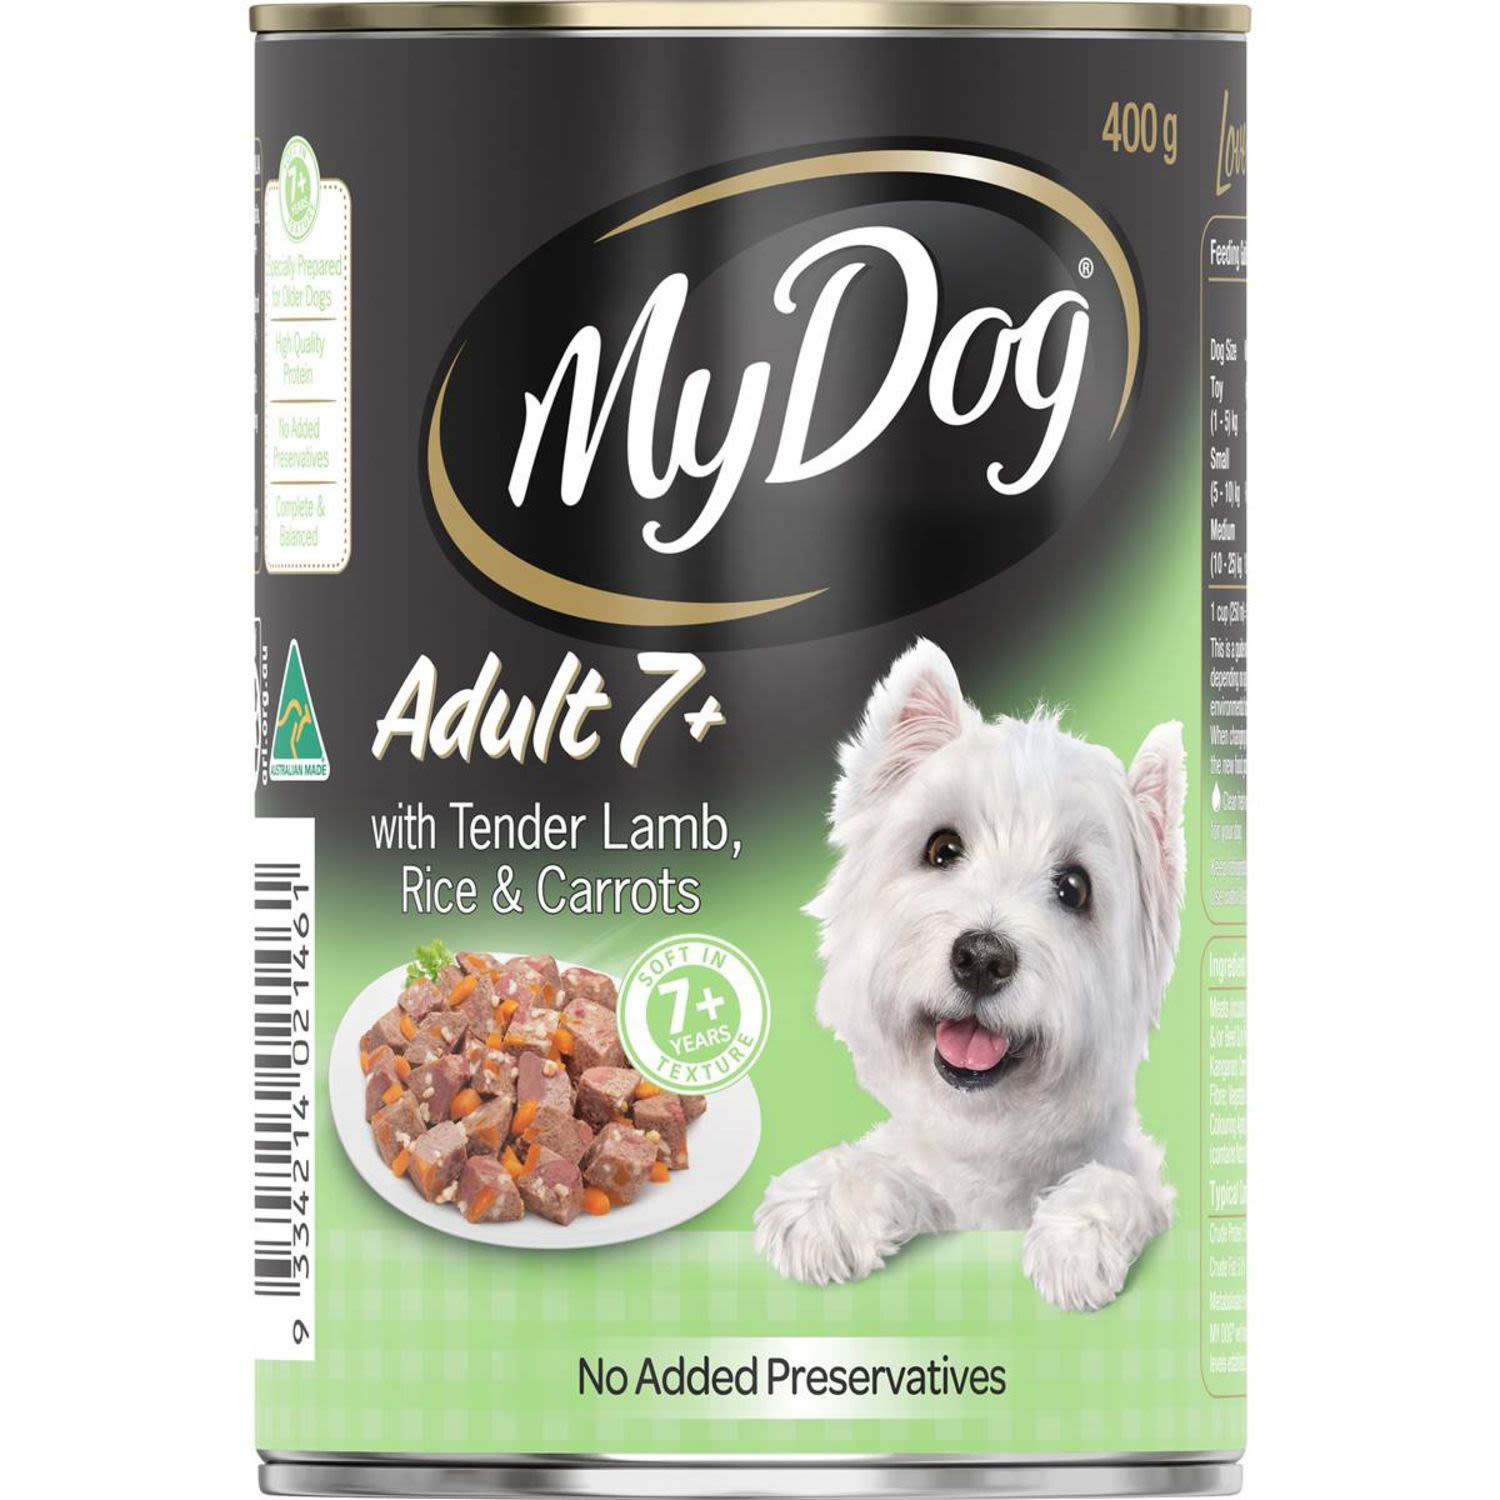 My Dog Adult 7+ Tender Lamb With Rice & Carrots Wet Dog Food Can, 400 Gram